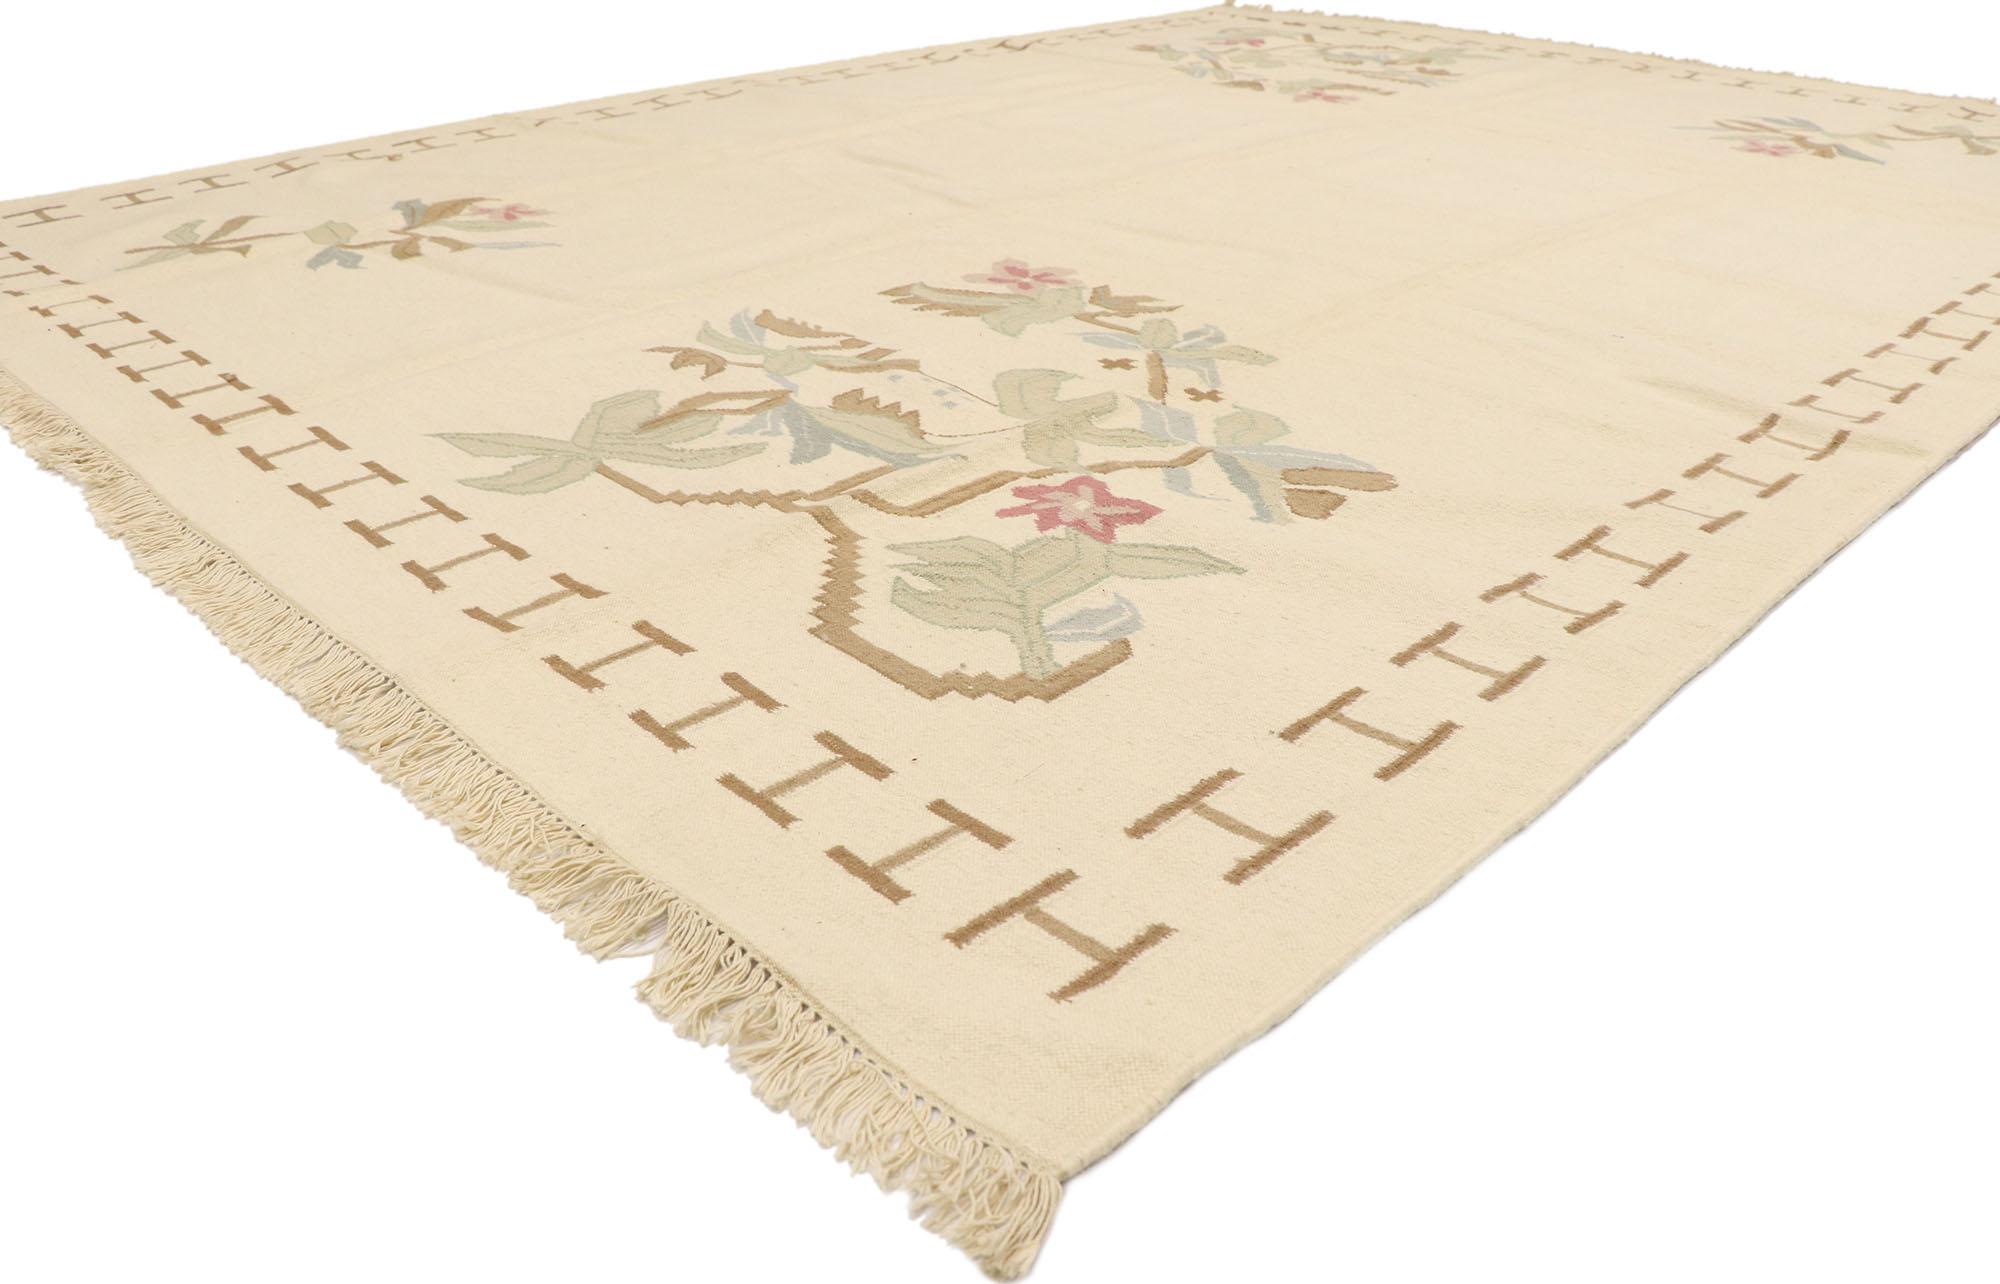 78000 Vintage Romanian Floral Kilim rug 08'07 x 11'06. With its effortless beauty and timeless style, this hand-woven wool vintage Romanian floral kilim rug is a captivating vision of woven beauty. It is enclosed with a thin repeating I-motif